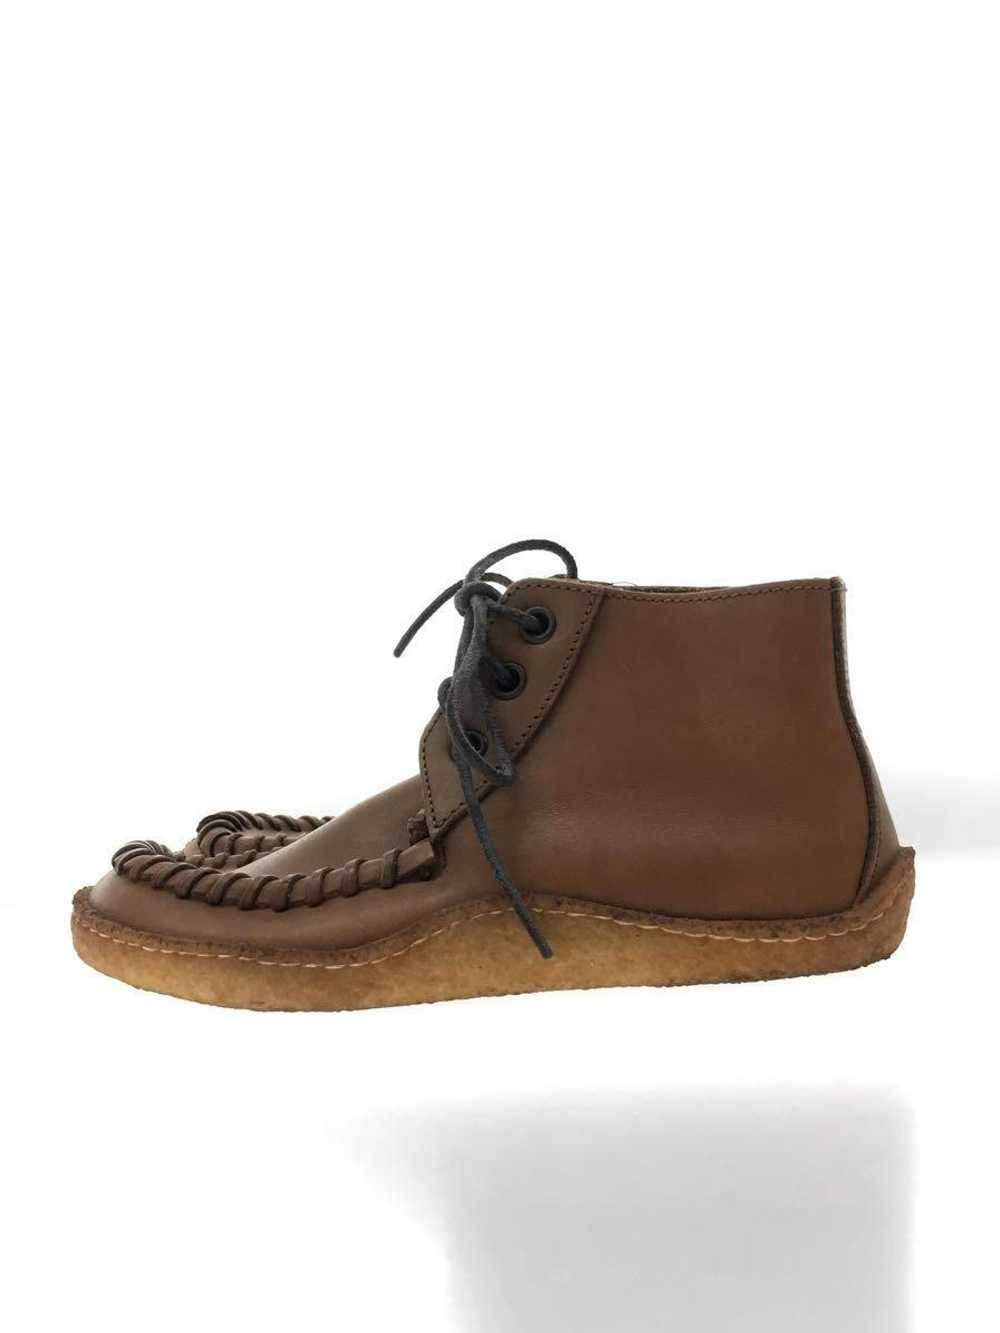 Punto Pigro Shoes/37/Brw/Leather Shoes BfB63 - image 1